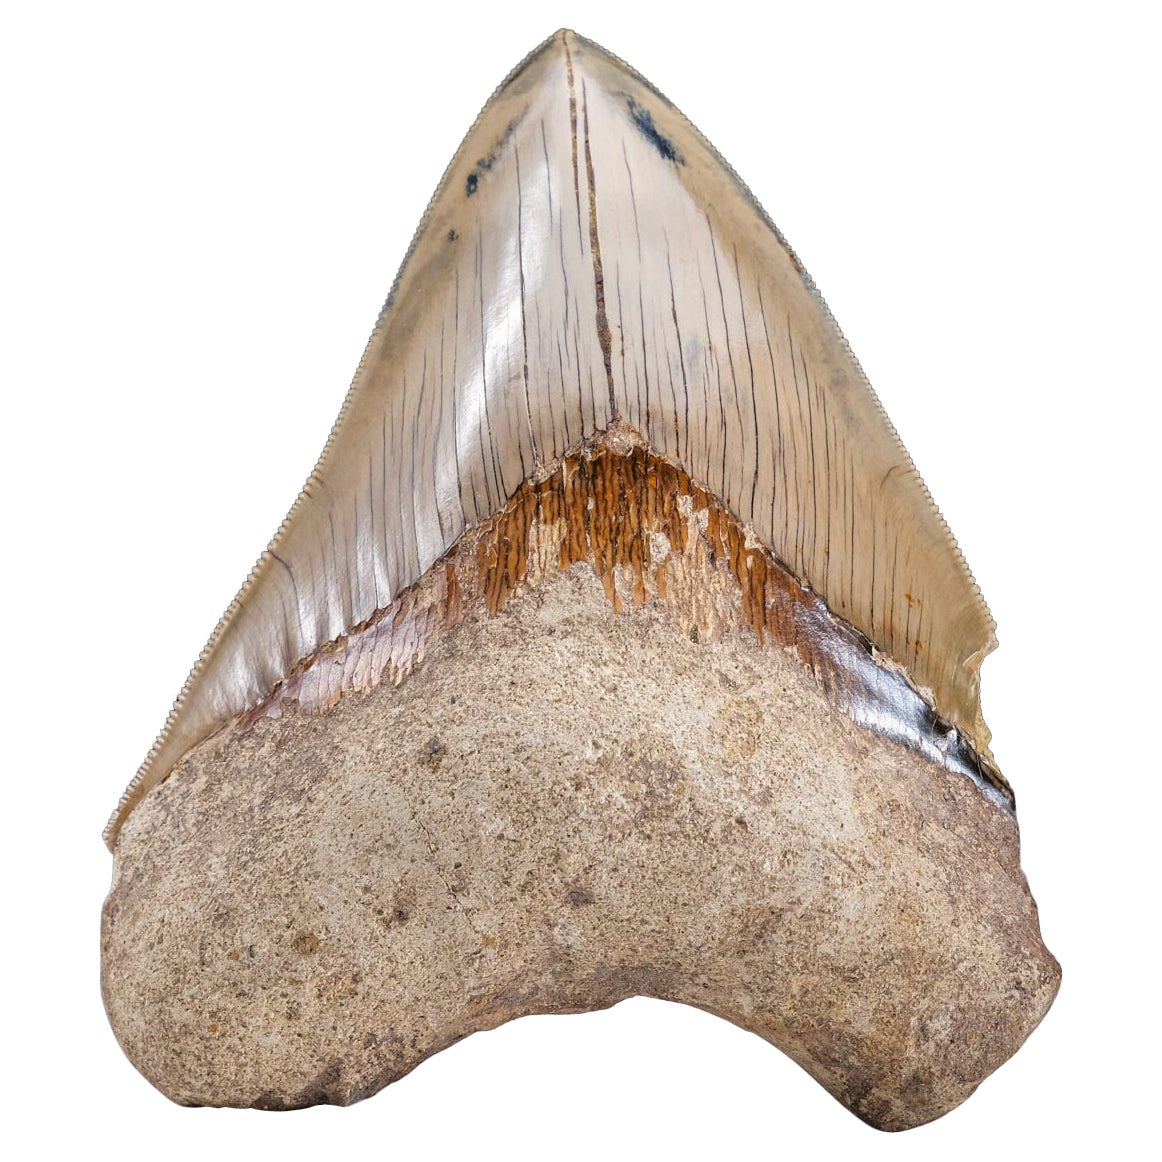 Large 5" Genuine Serrated Megalodon Shark Tooth from Indonesia in Display Box 